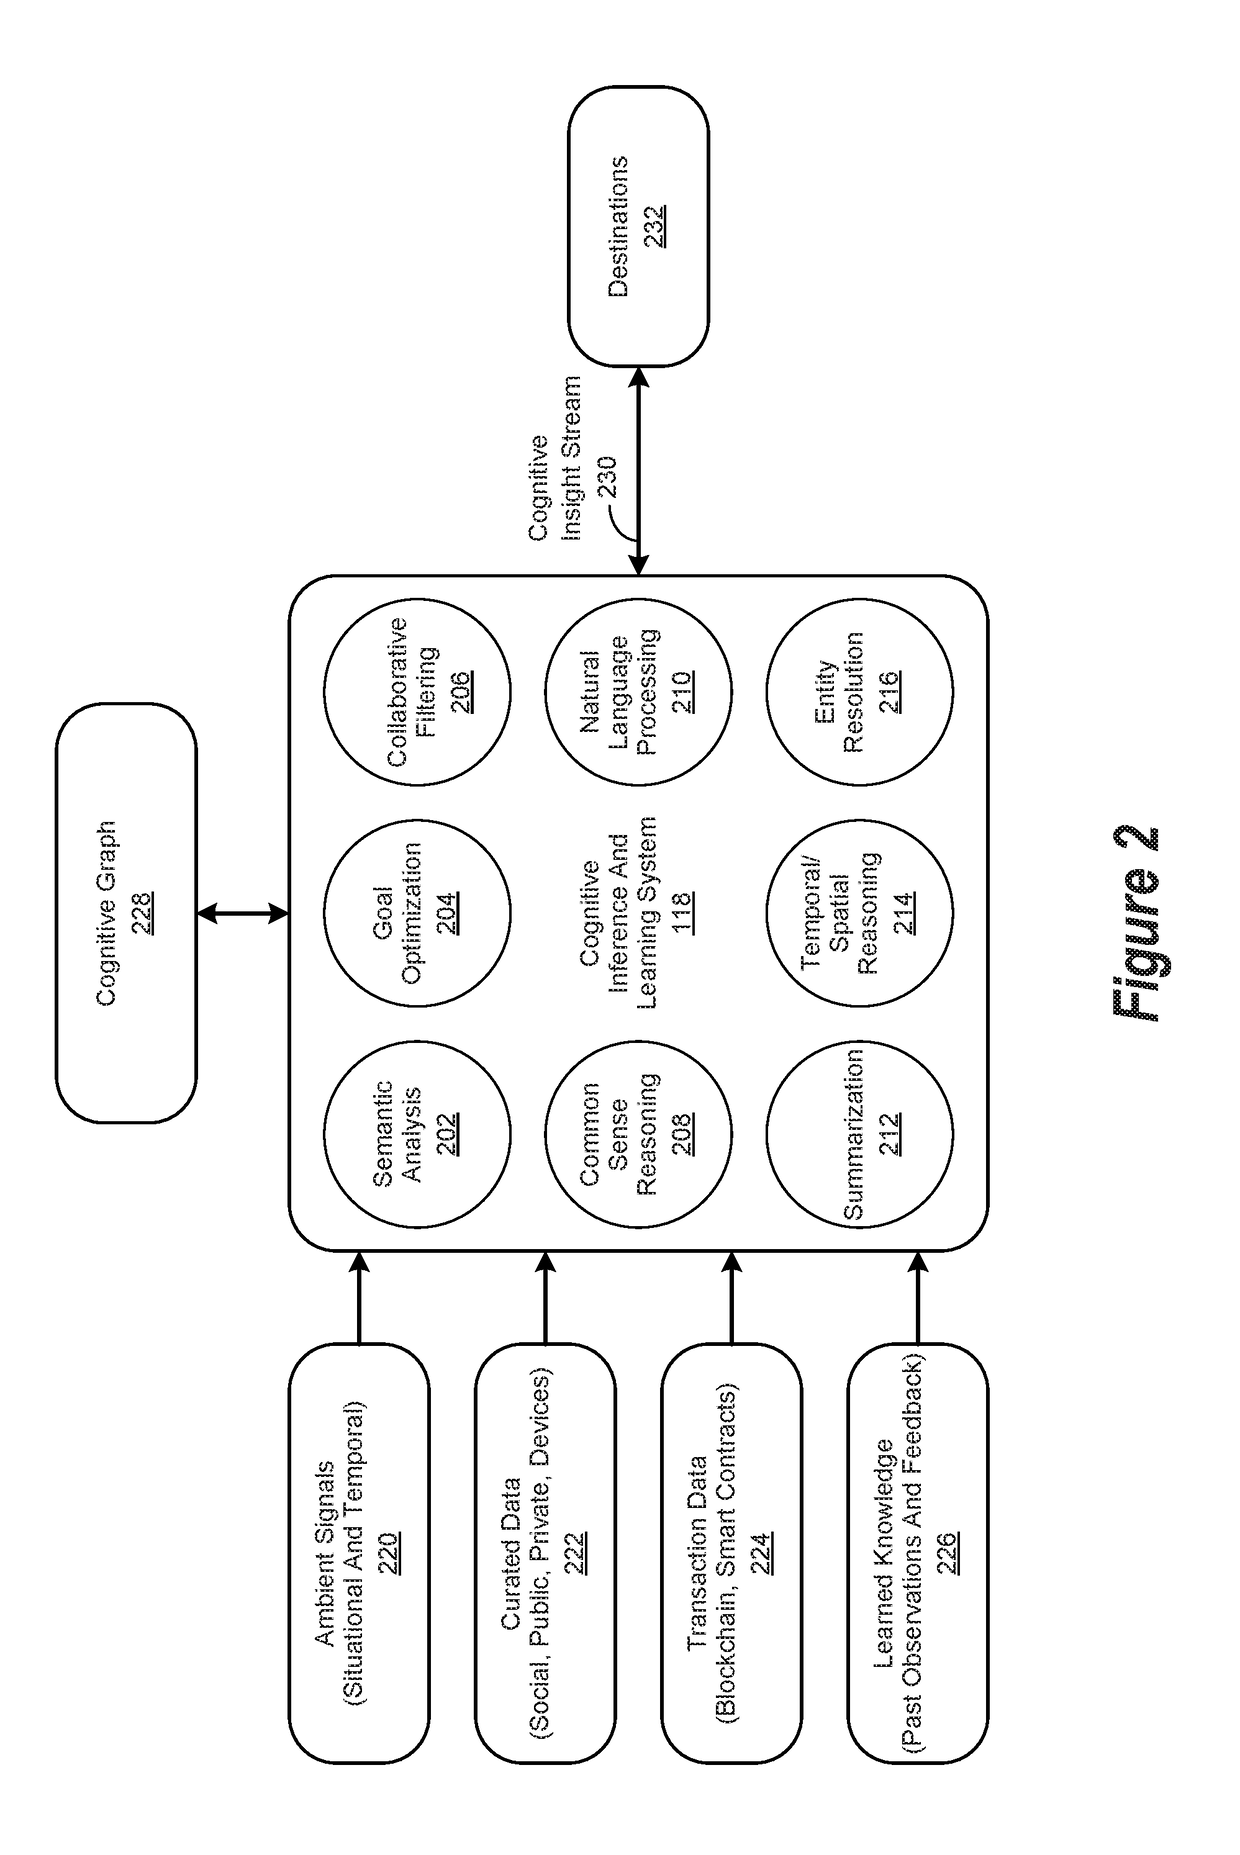 System for Performing Compliance Operations Using Cognitive Blockchains